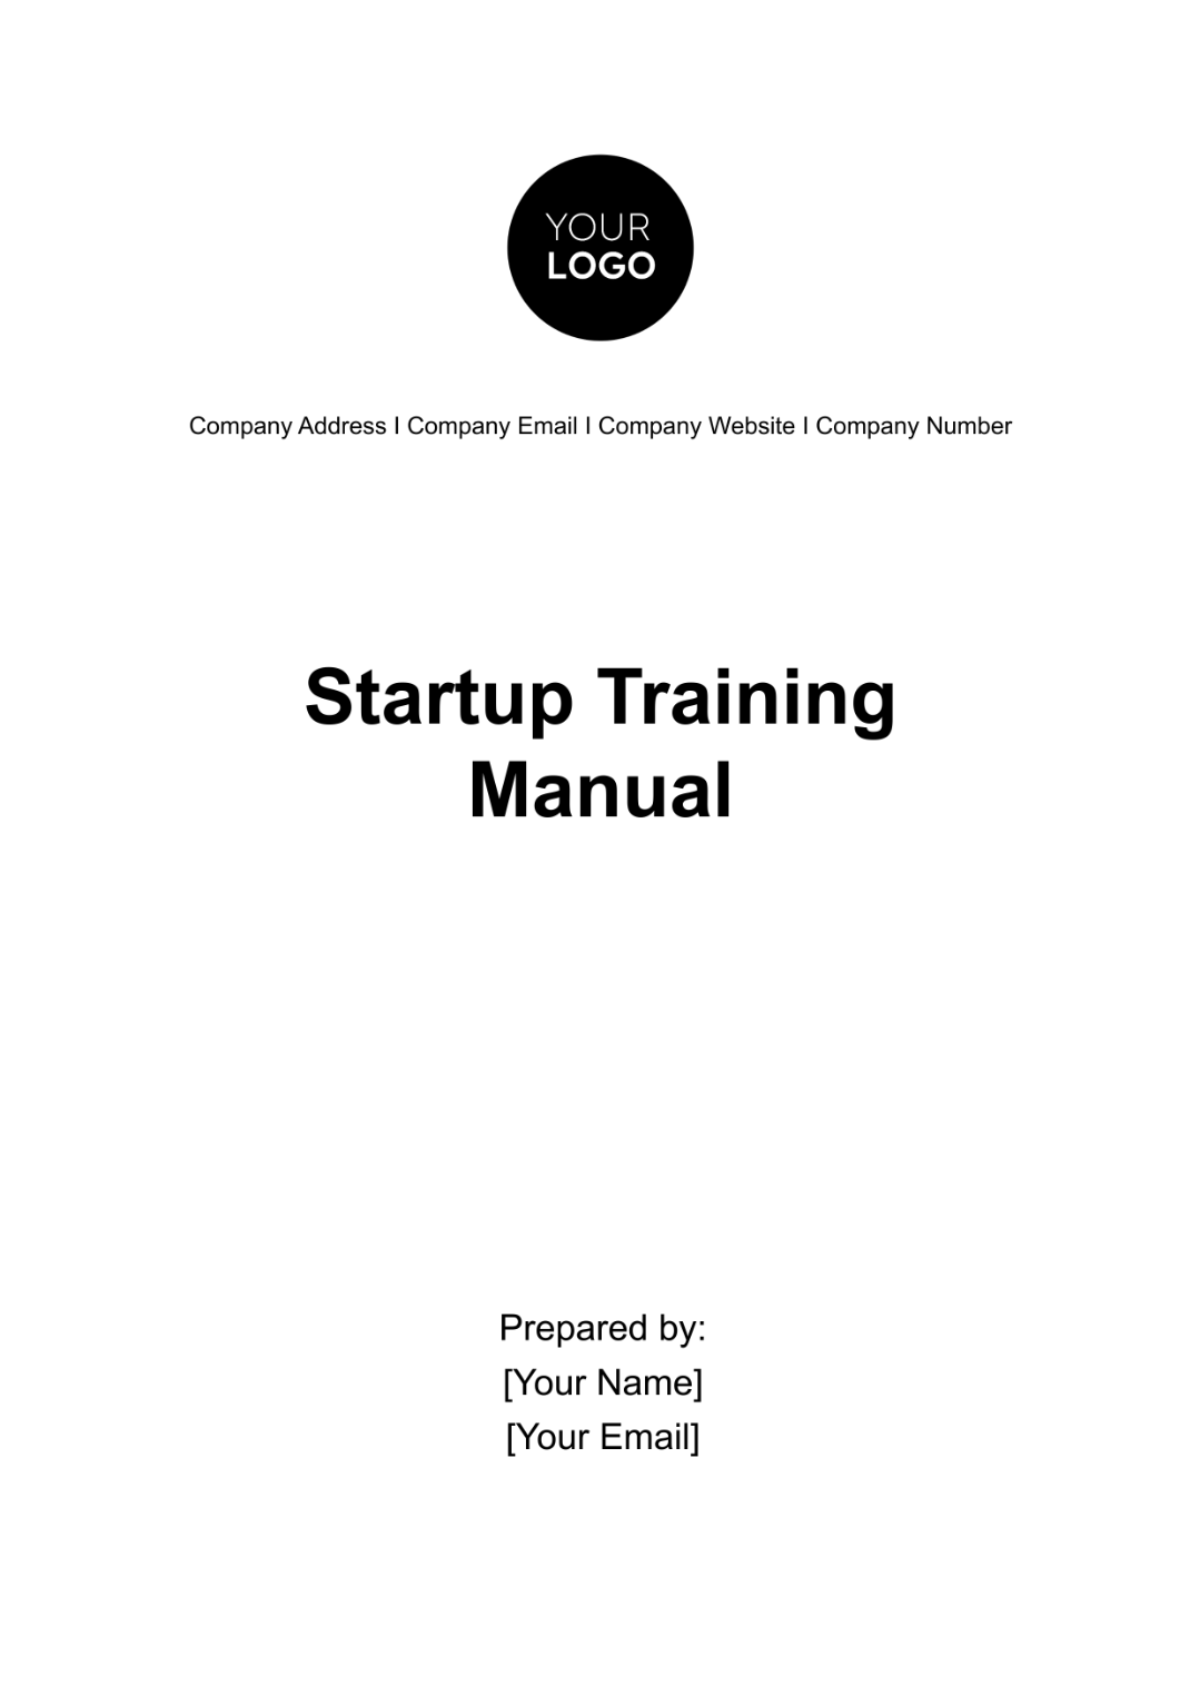 Startup Training Manual Template